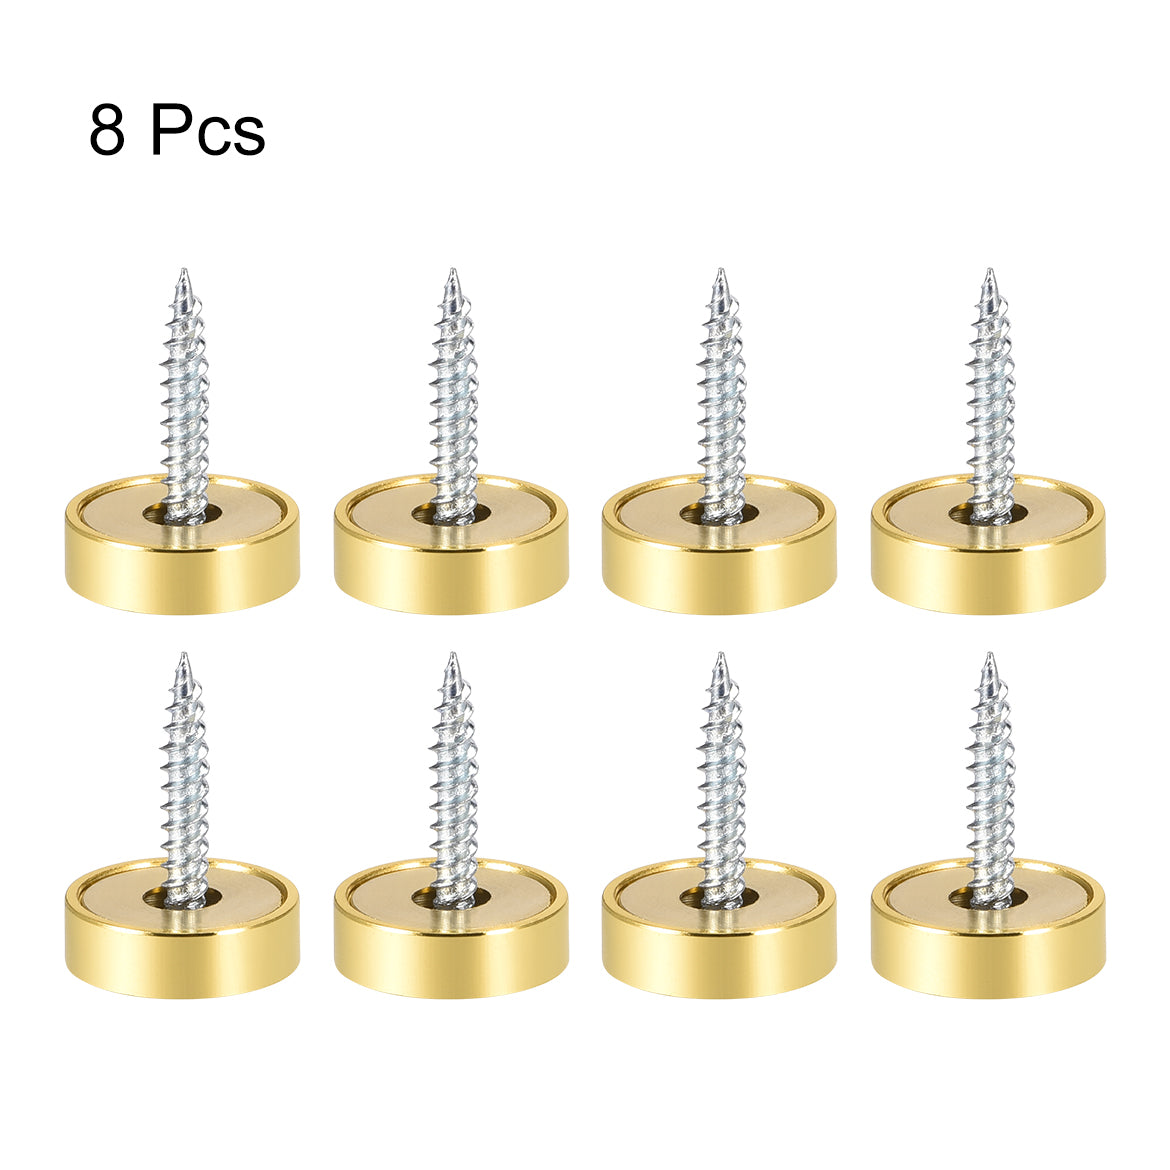 uxcell Uxcell Mirror Screws Decorative Cap Cover Nails Polished Stainless Steel 8pcs